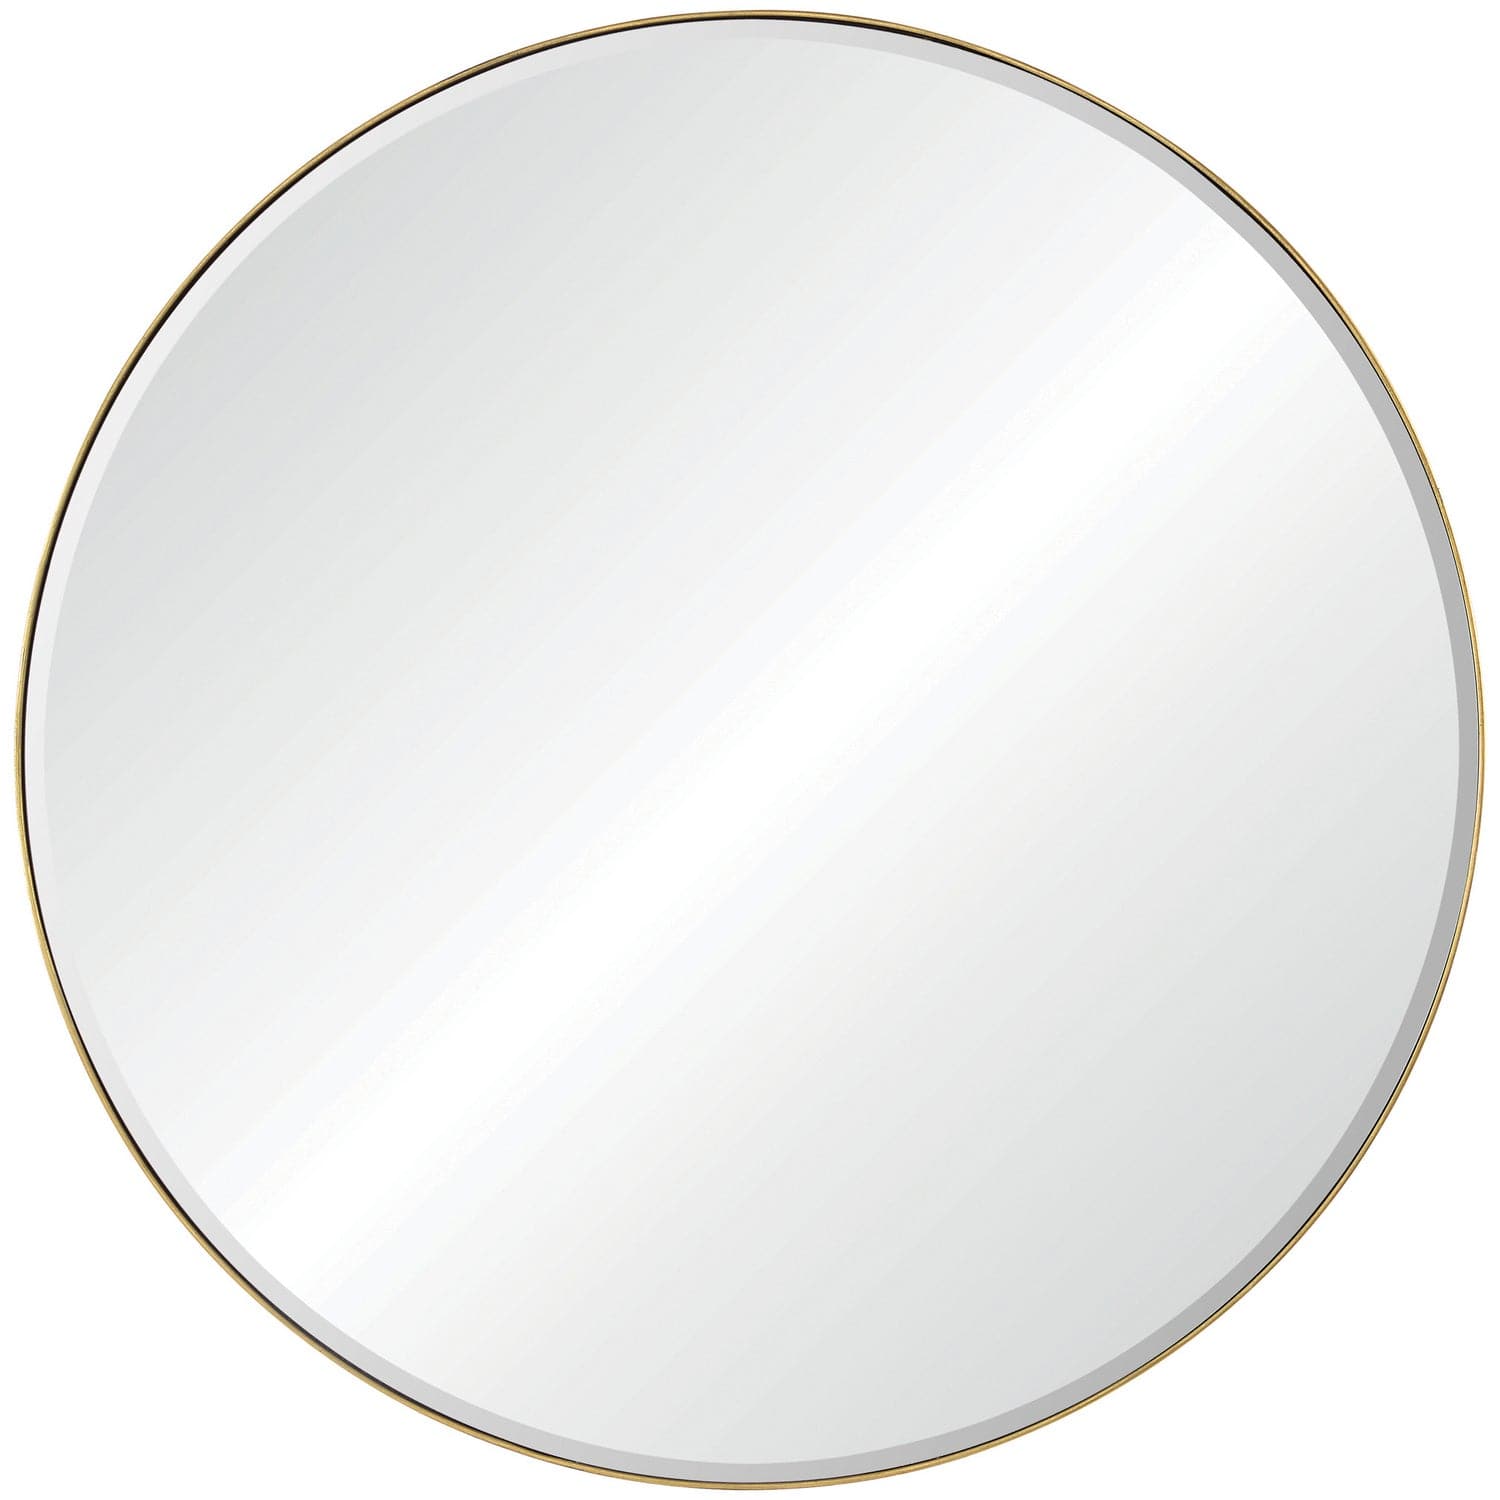 Renwil - MT2347 - Mirrors/Pictures - Mirrors-Oval/Rd.